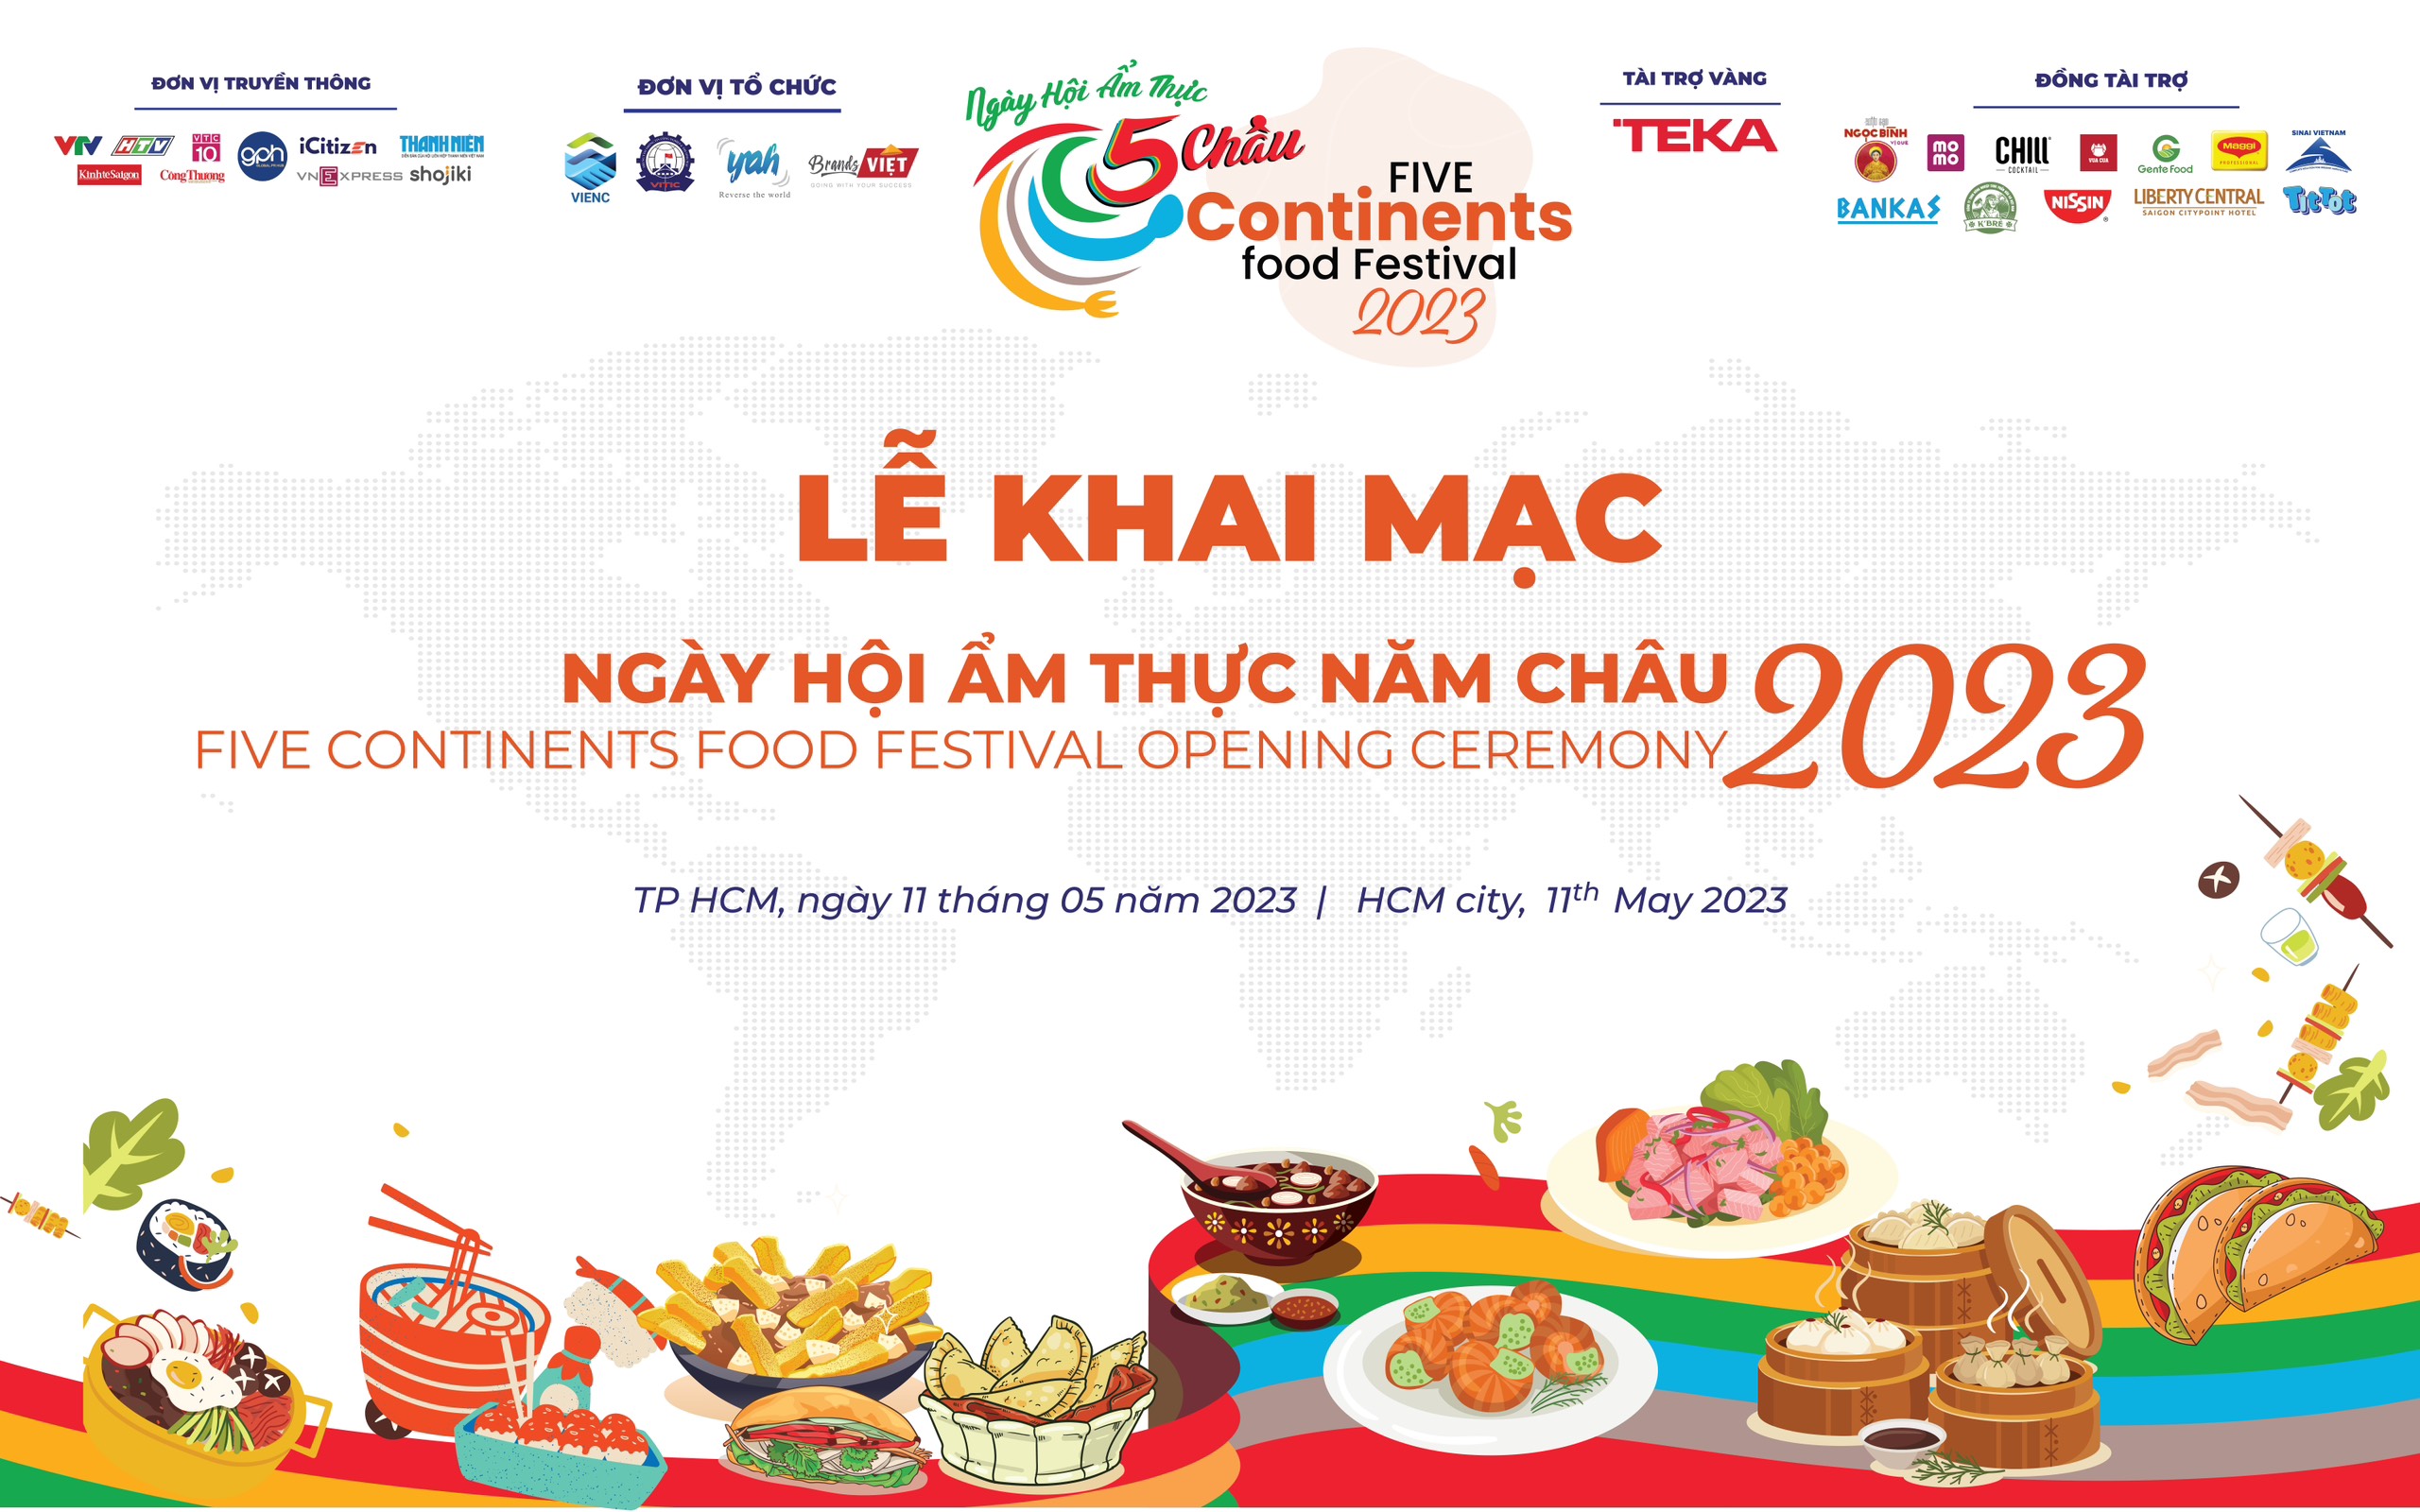 A poster of the Five Continents Food Festival taking place from May 11-14 at Phu Tho Gymnasium in District 11, Ho Chi Minh City